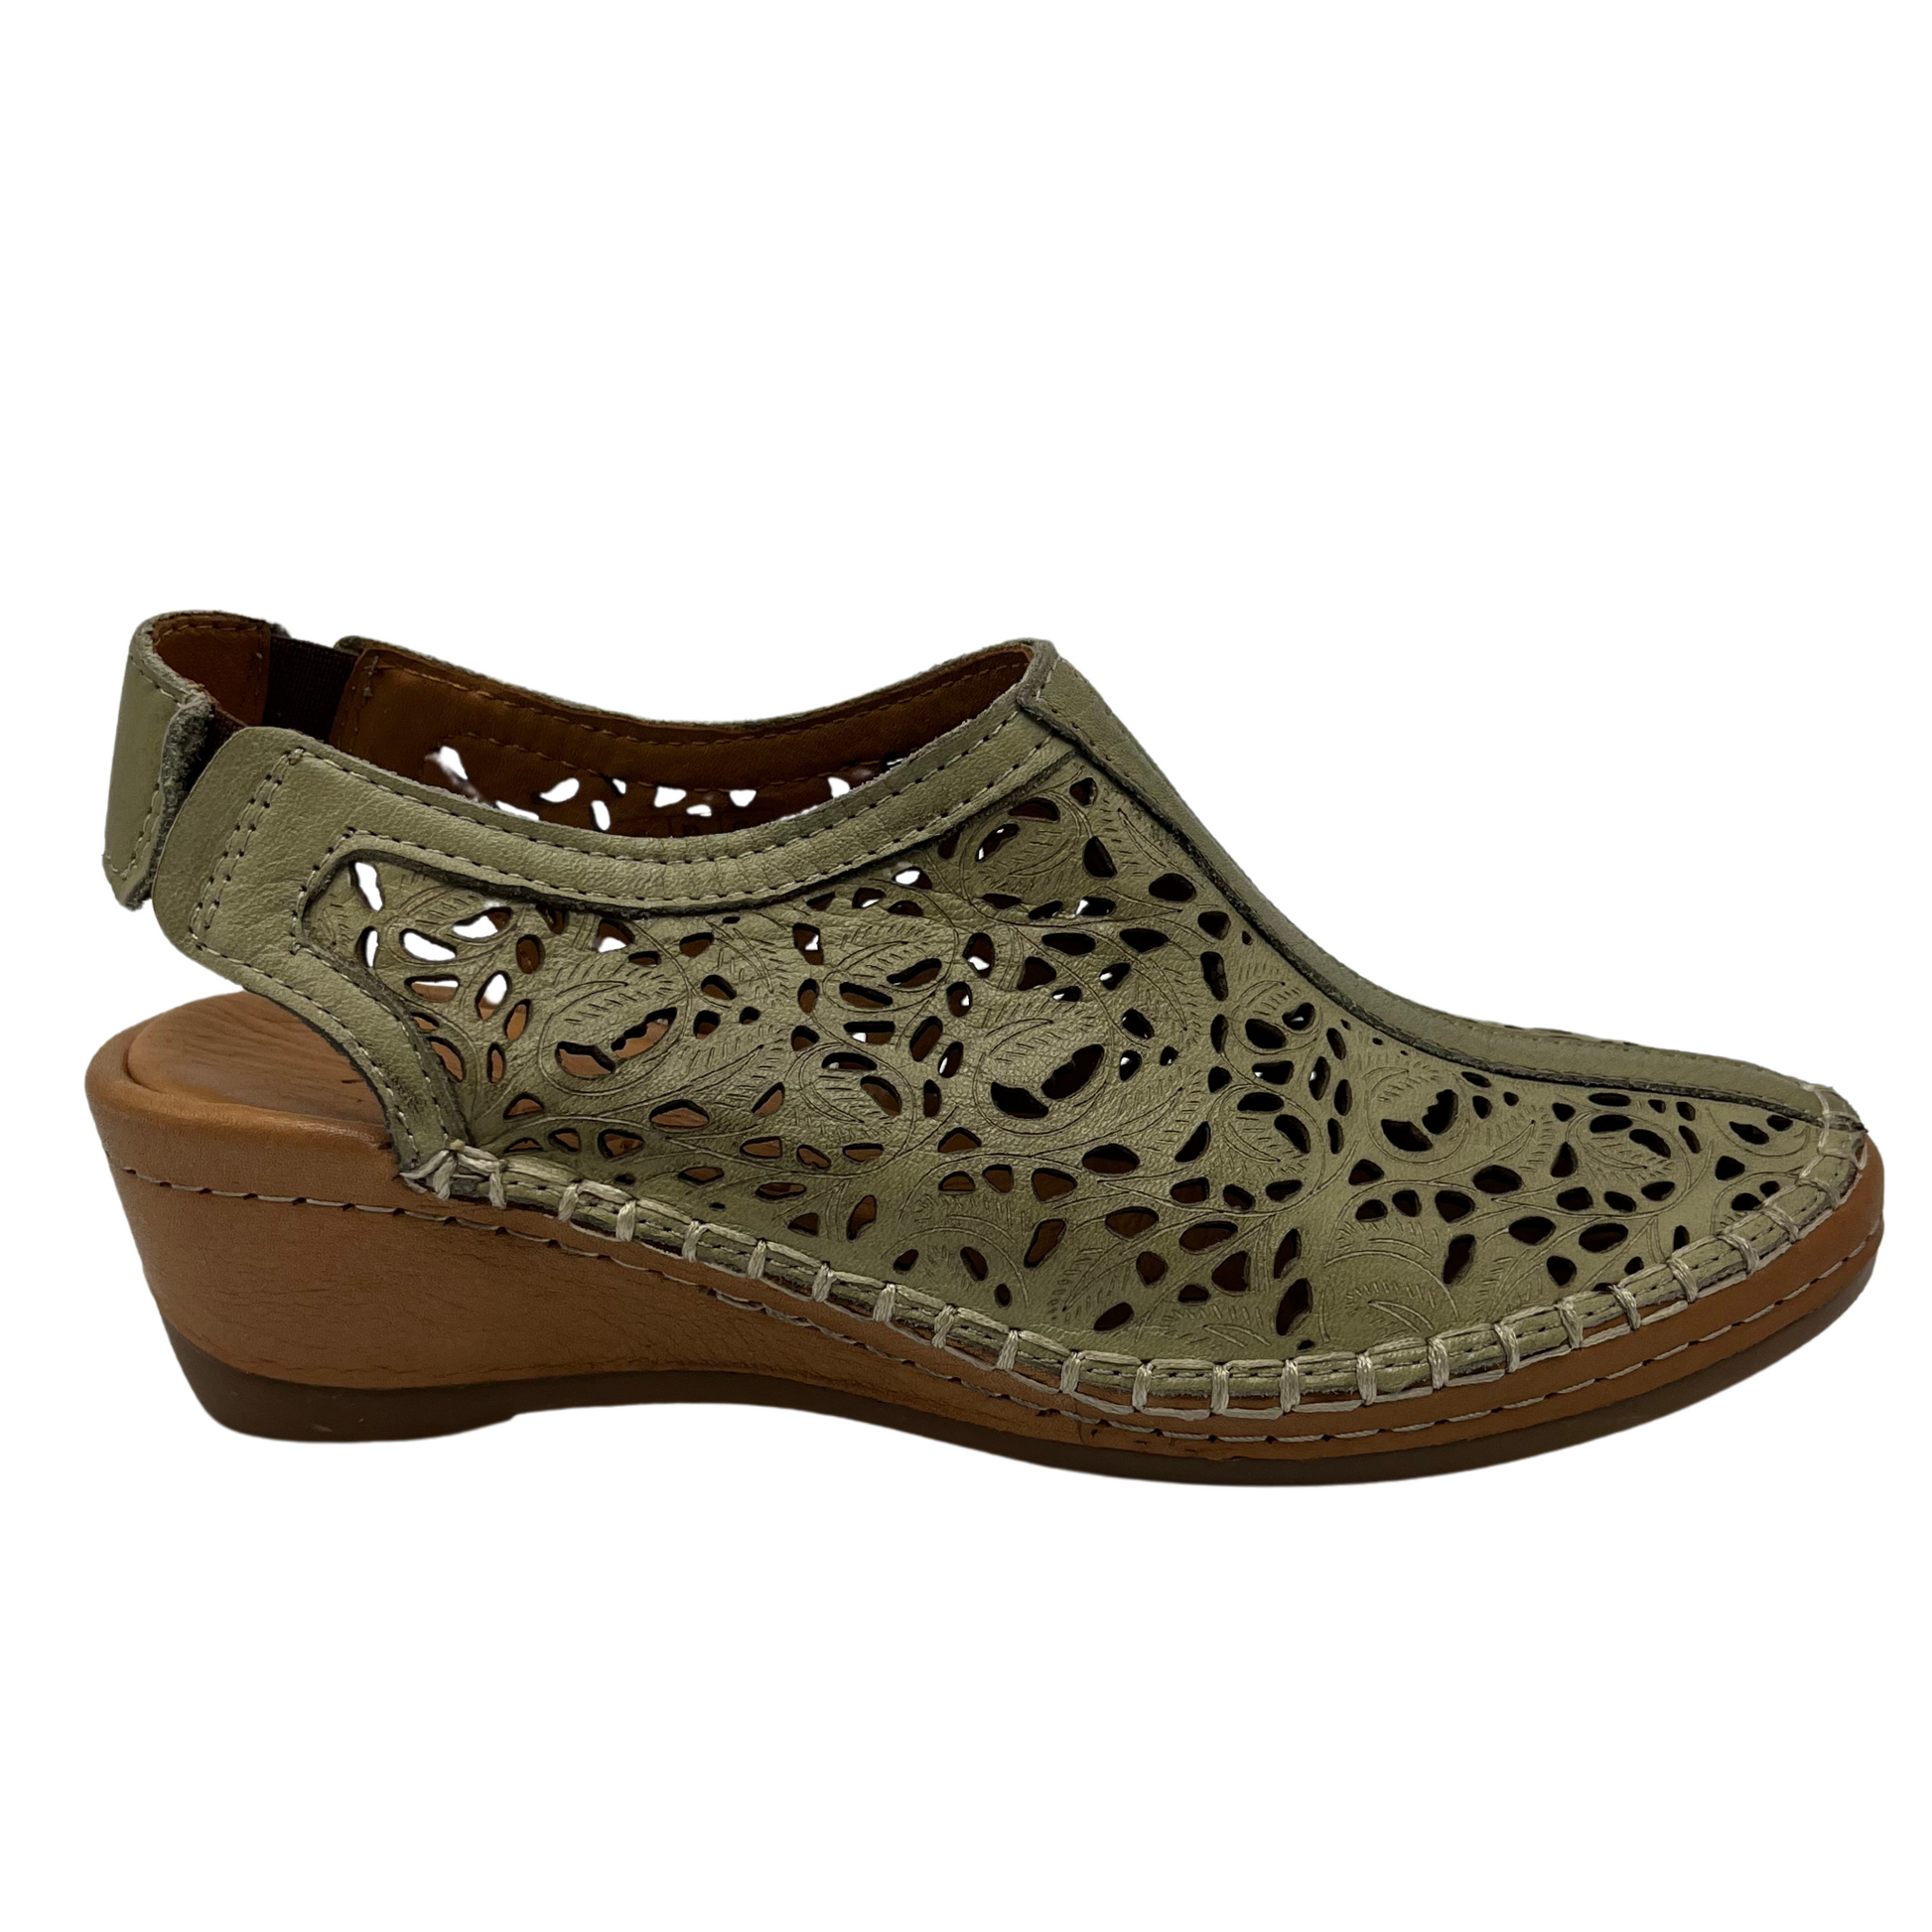 Right facing view of light green leather shoe with cut out design with low wedge heel